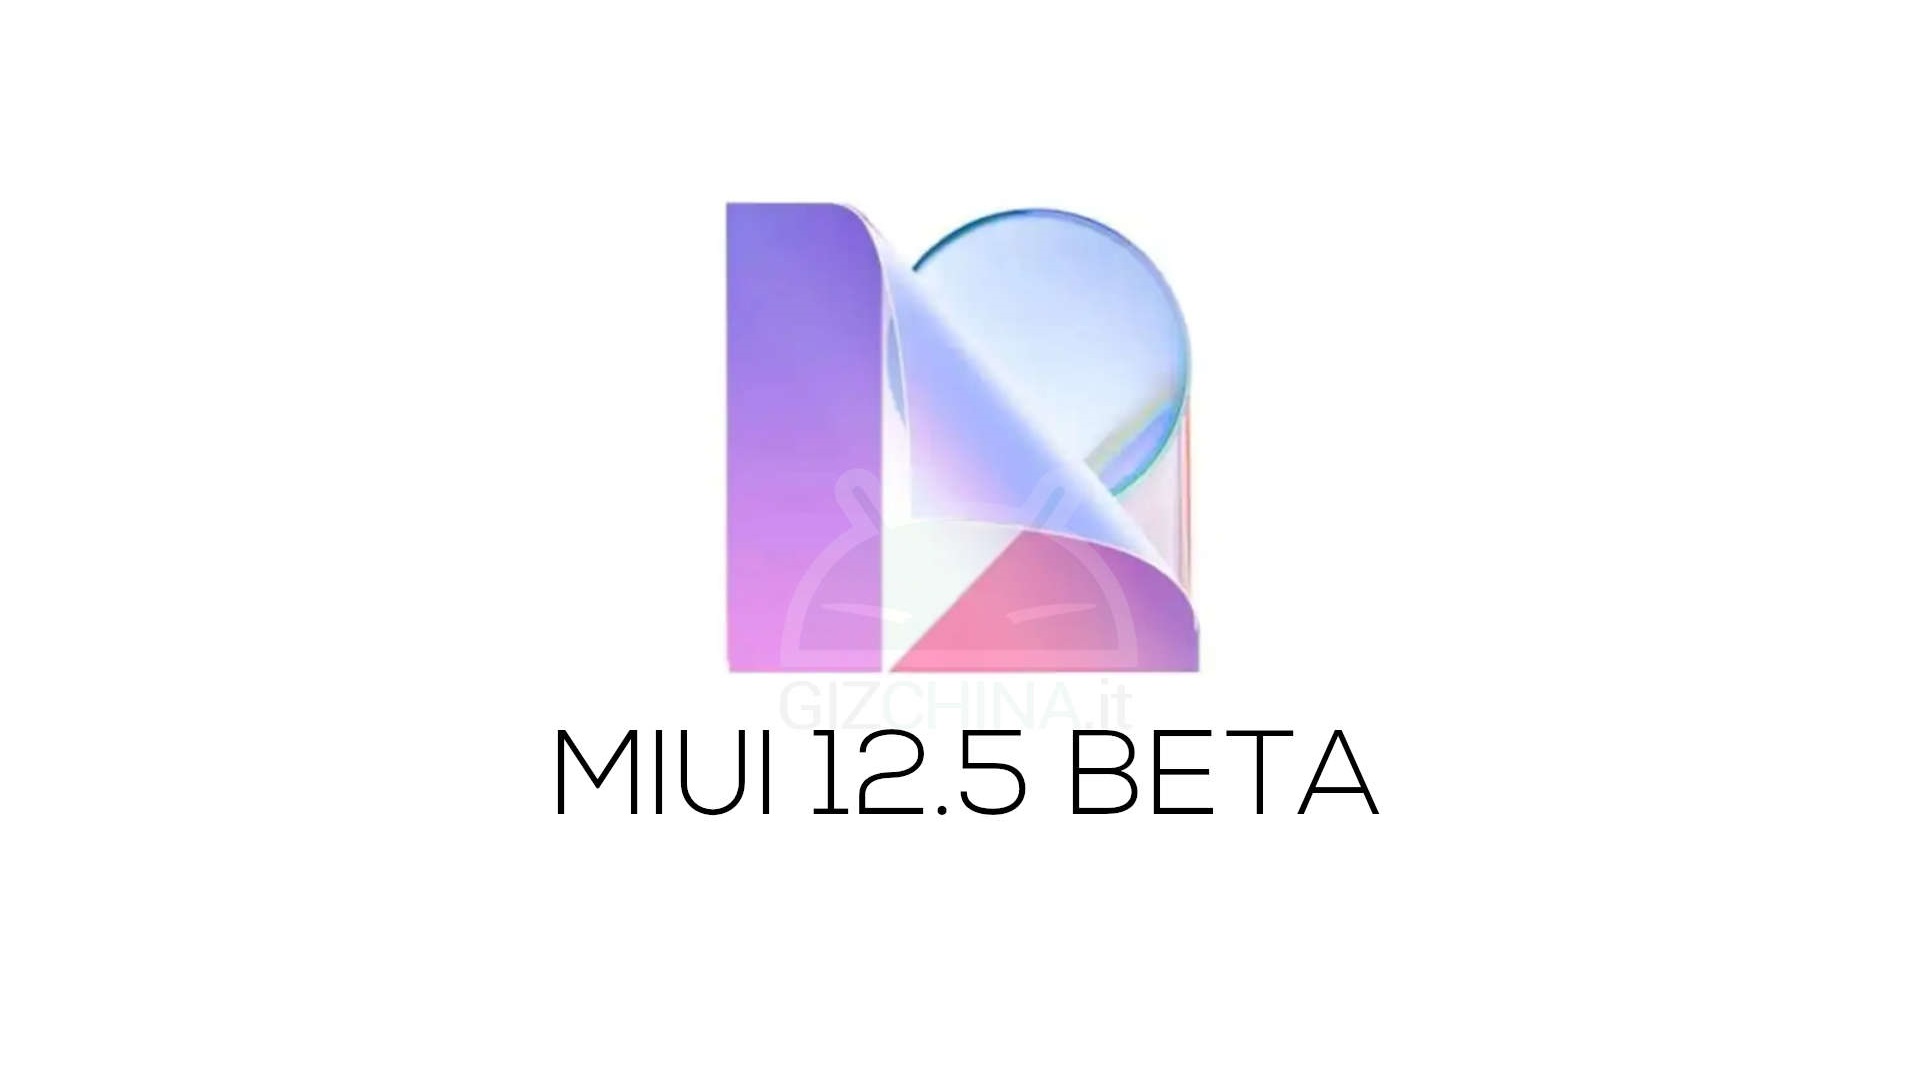 MIUI 12.5 Beta is available for various Xiaomi and Redmi |  Download 20.1.4